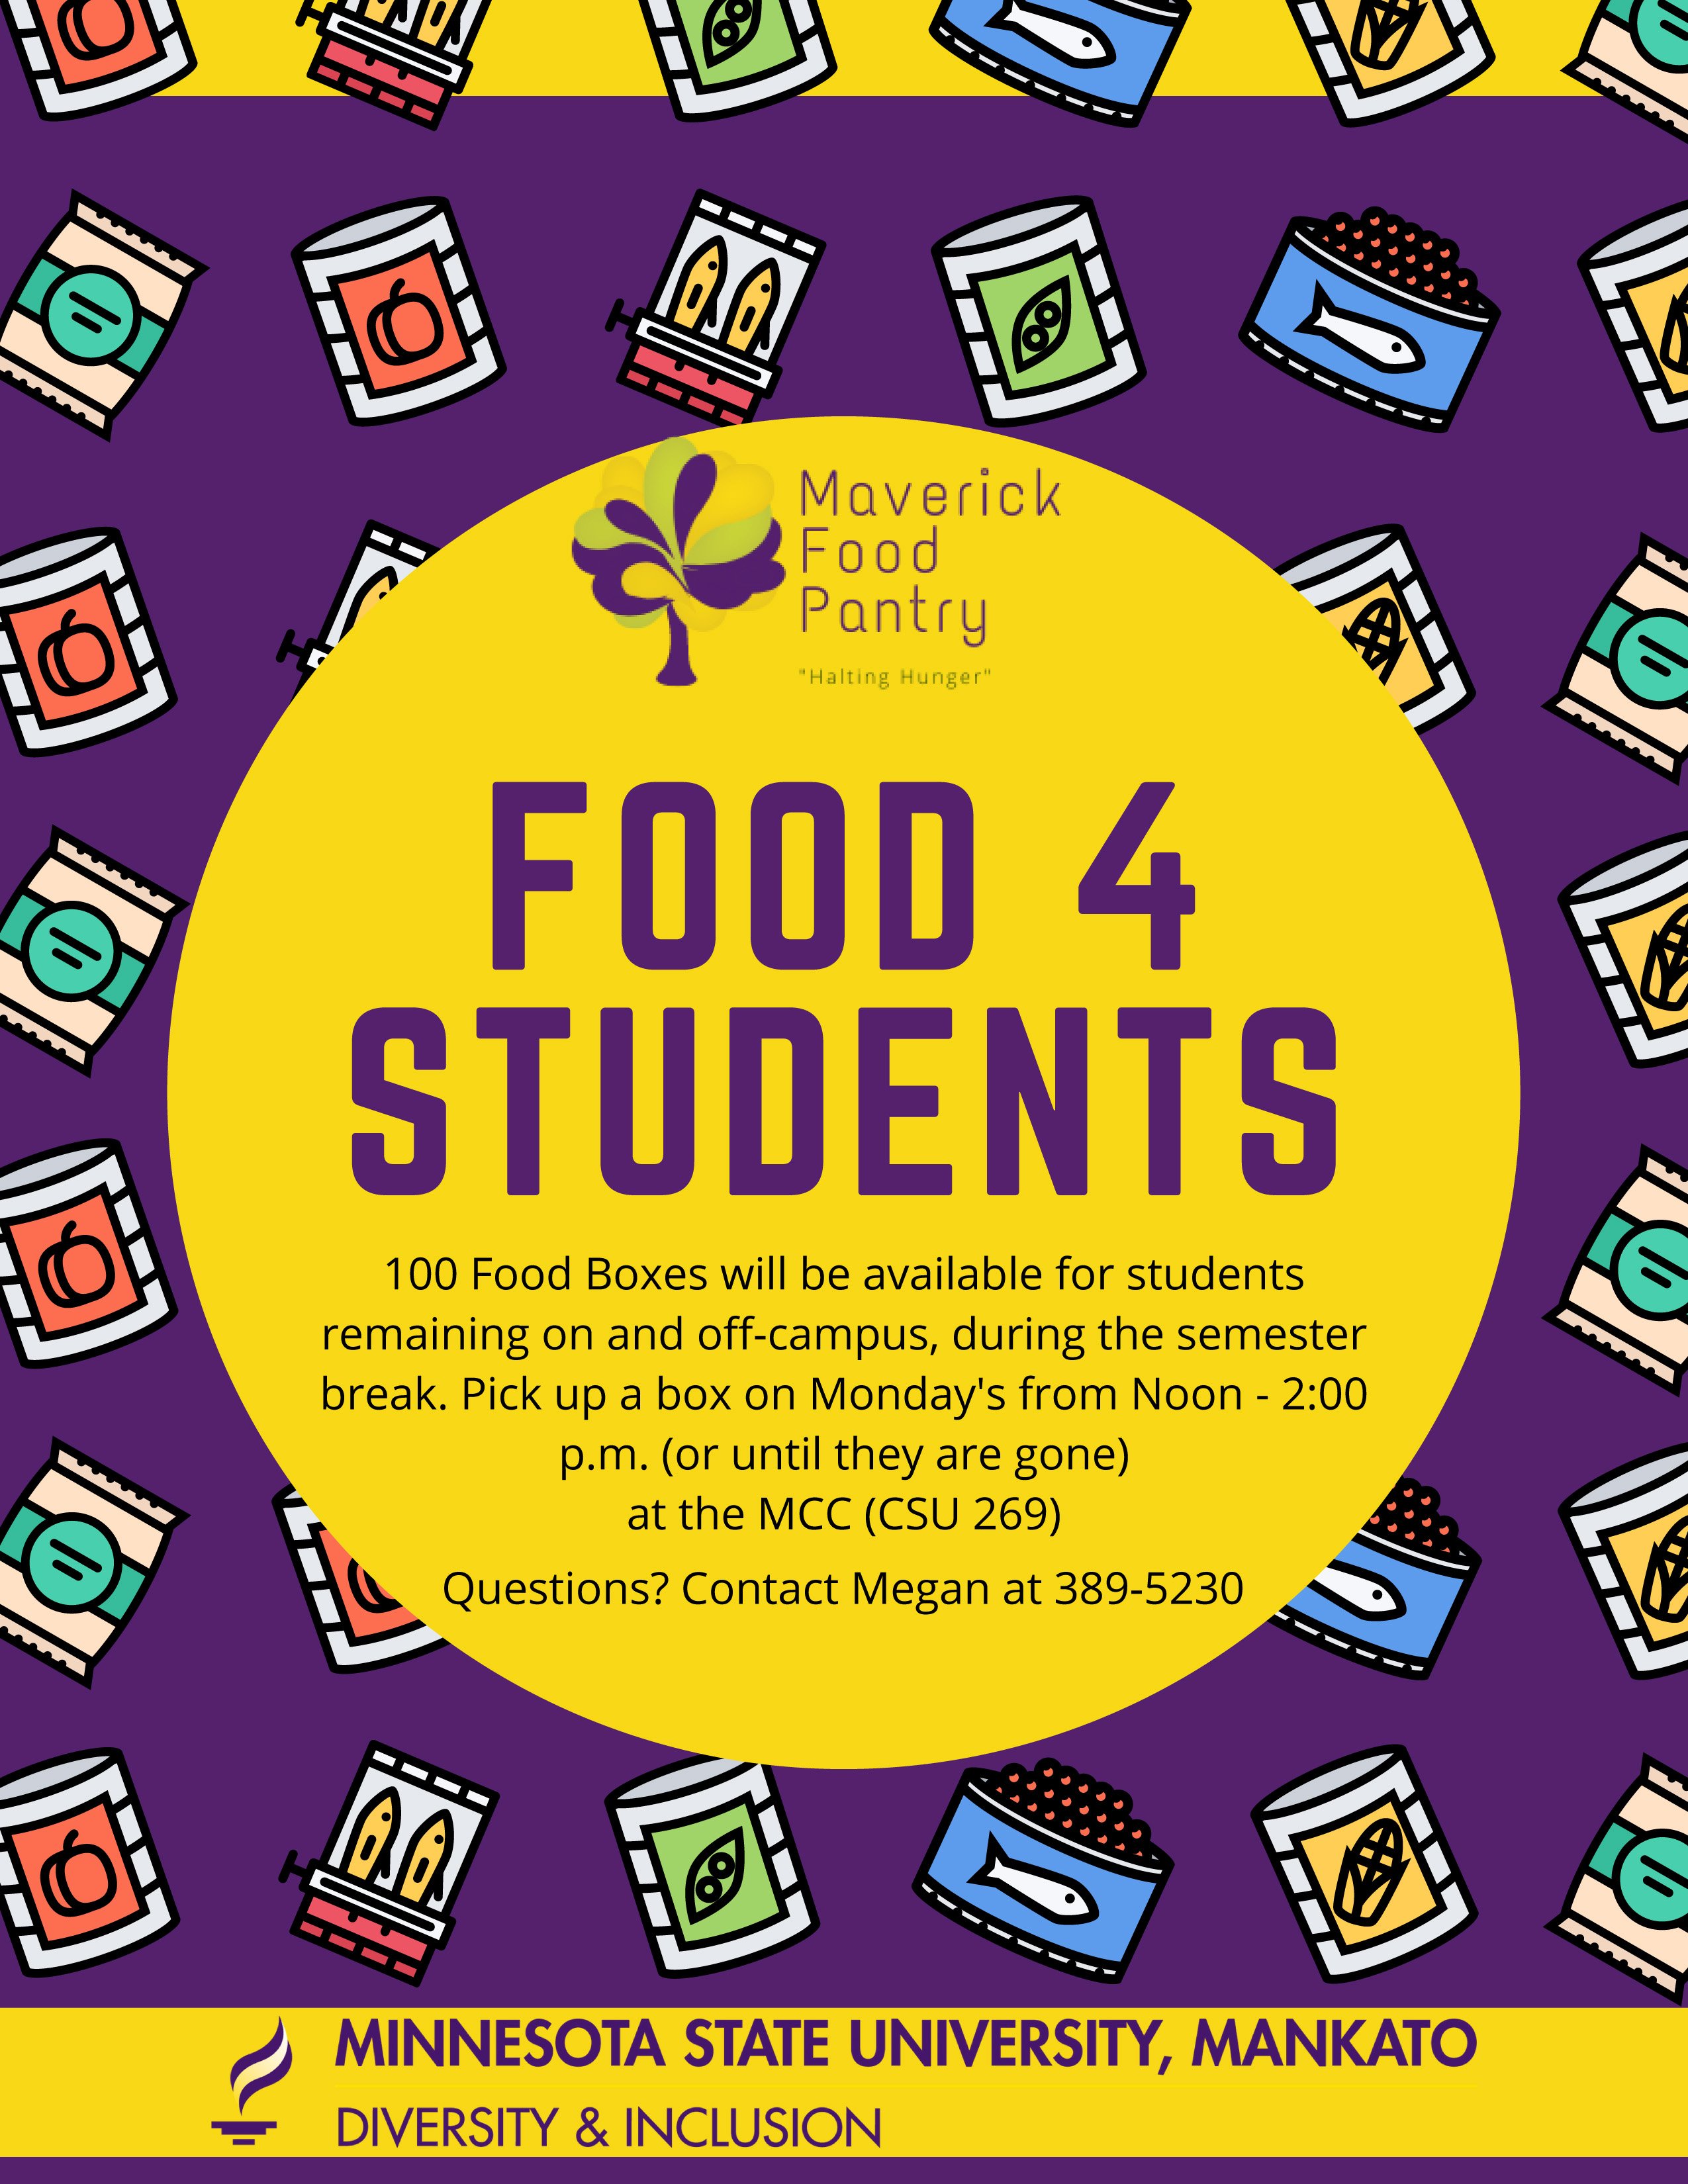 100 Food Boxes will be available for students during the semester break on Mondays from Noon to 2pm at CSU 269.